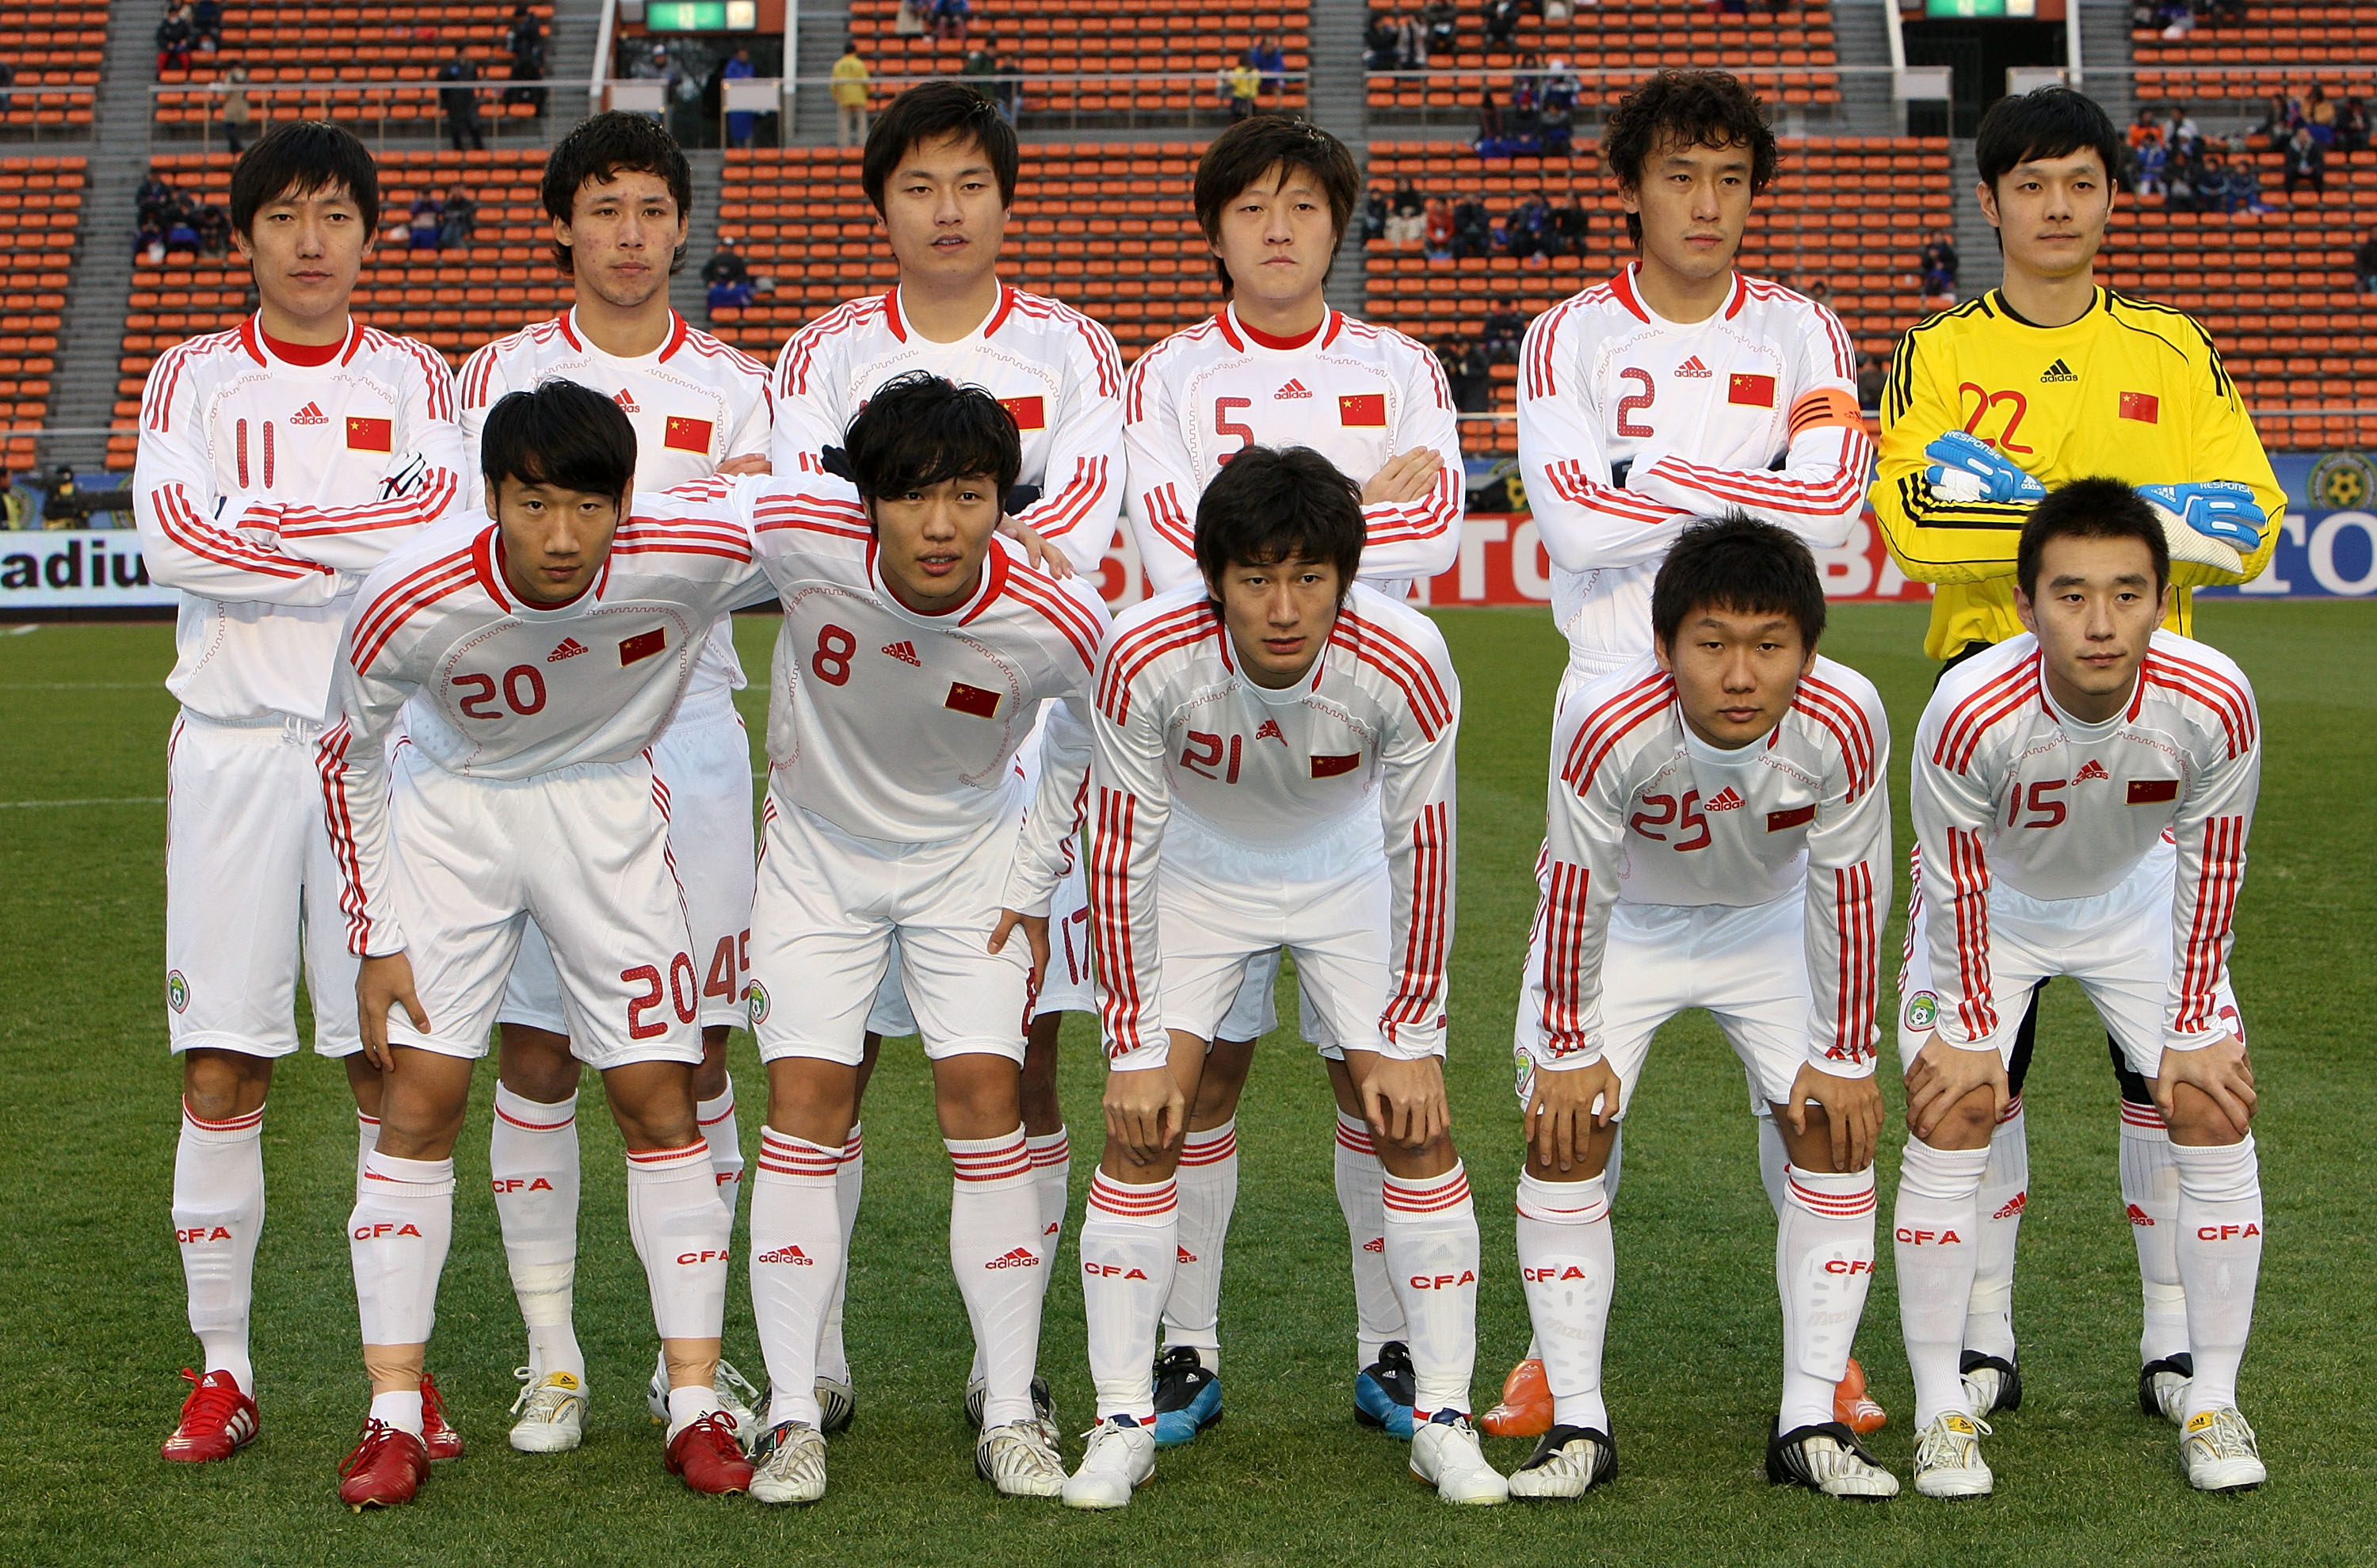 TOKYO - FEBRUARY 14:  Players of China pose for photographs prior to playing the East Asian Football Championship 2010 match between Hong Kong and China at the National Stadium on February 14, 2010 in Tokyo, Japan.  (Photo by Junko Kimura/Getty Images)